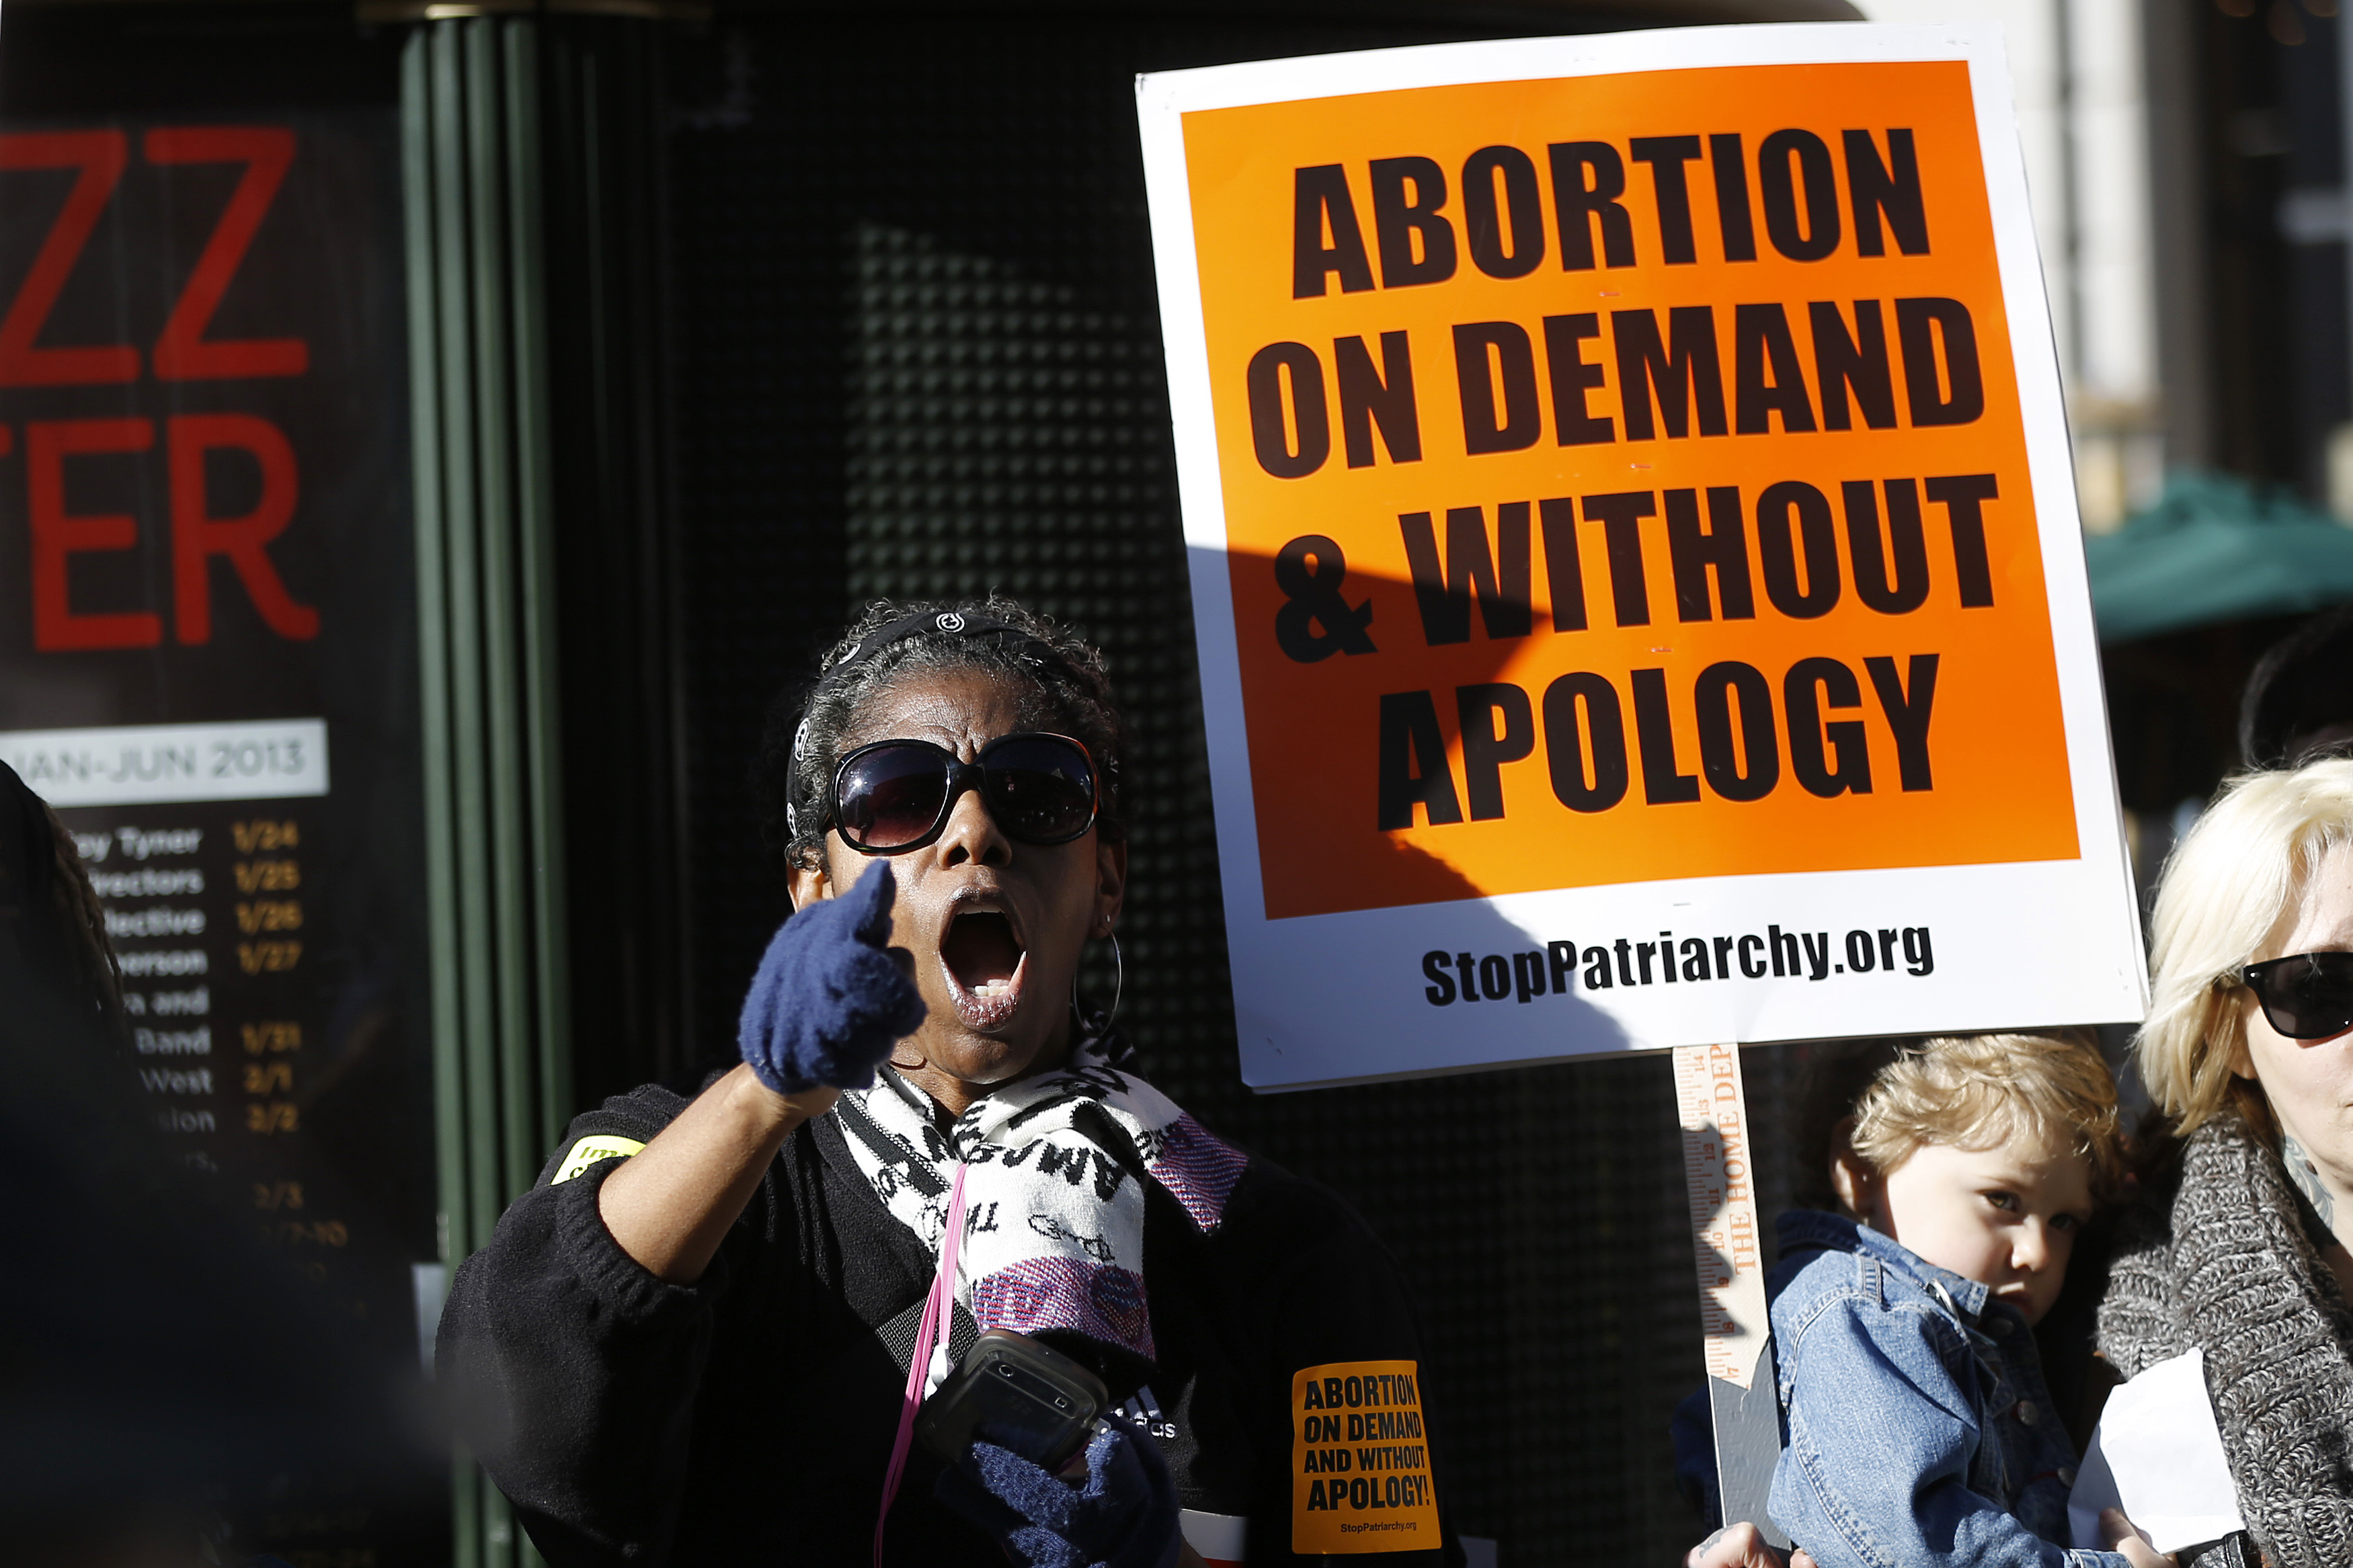 A pro-choice demonstrator shouts during a counter demonstration at the Ninth Annual Walk for Life West Coast in San Francisco, California, January 26, 2013. REUTERS/Stephen Lam